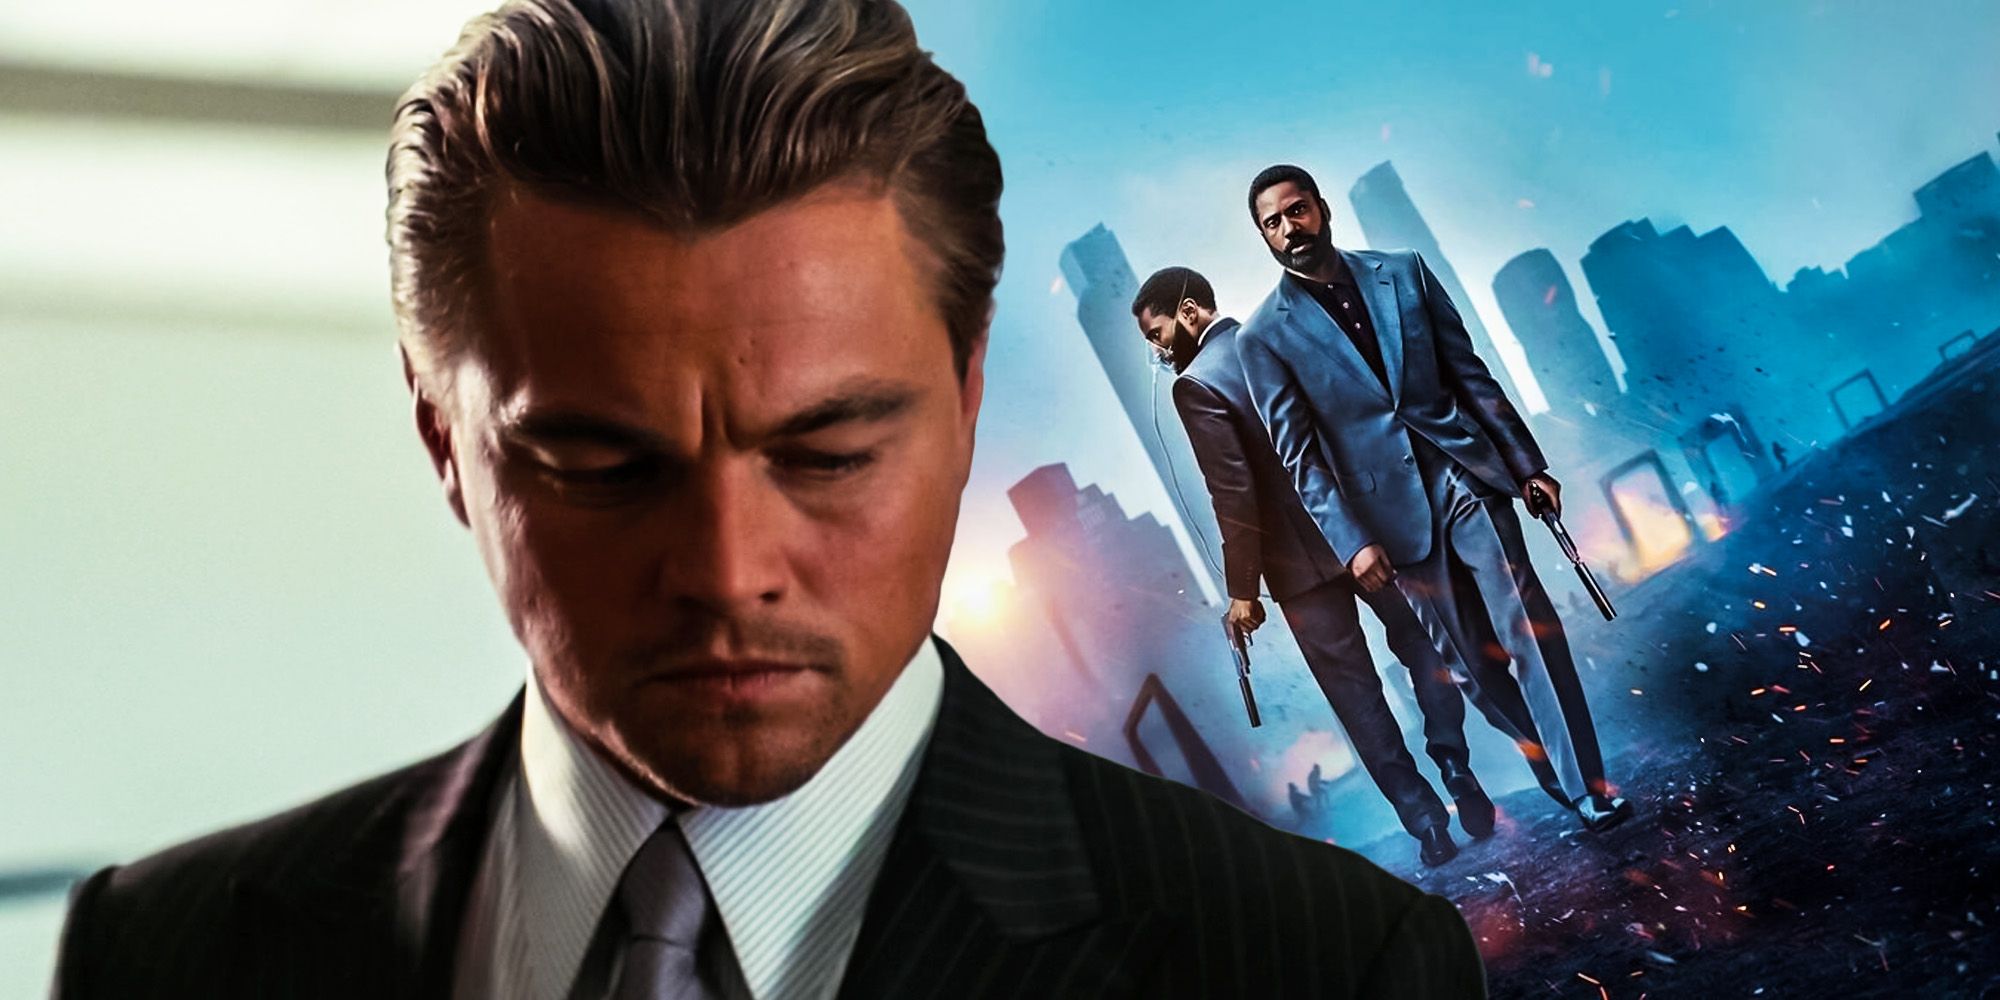 Rewatching Tenet: 10 Things Everyone Got Wrong About Christopher Nolan’s Thriller 4 Years Ago